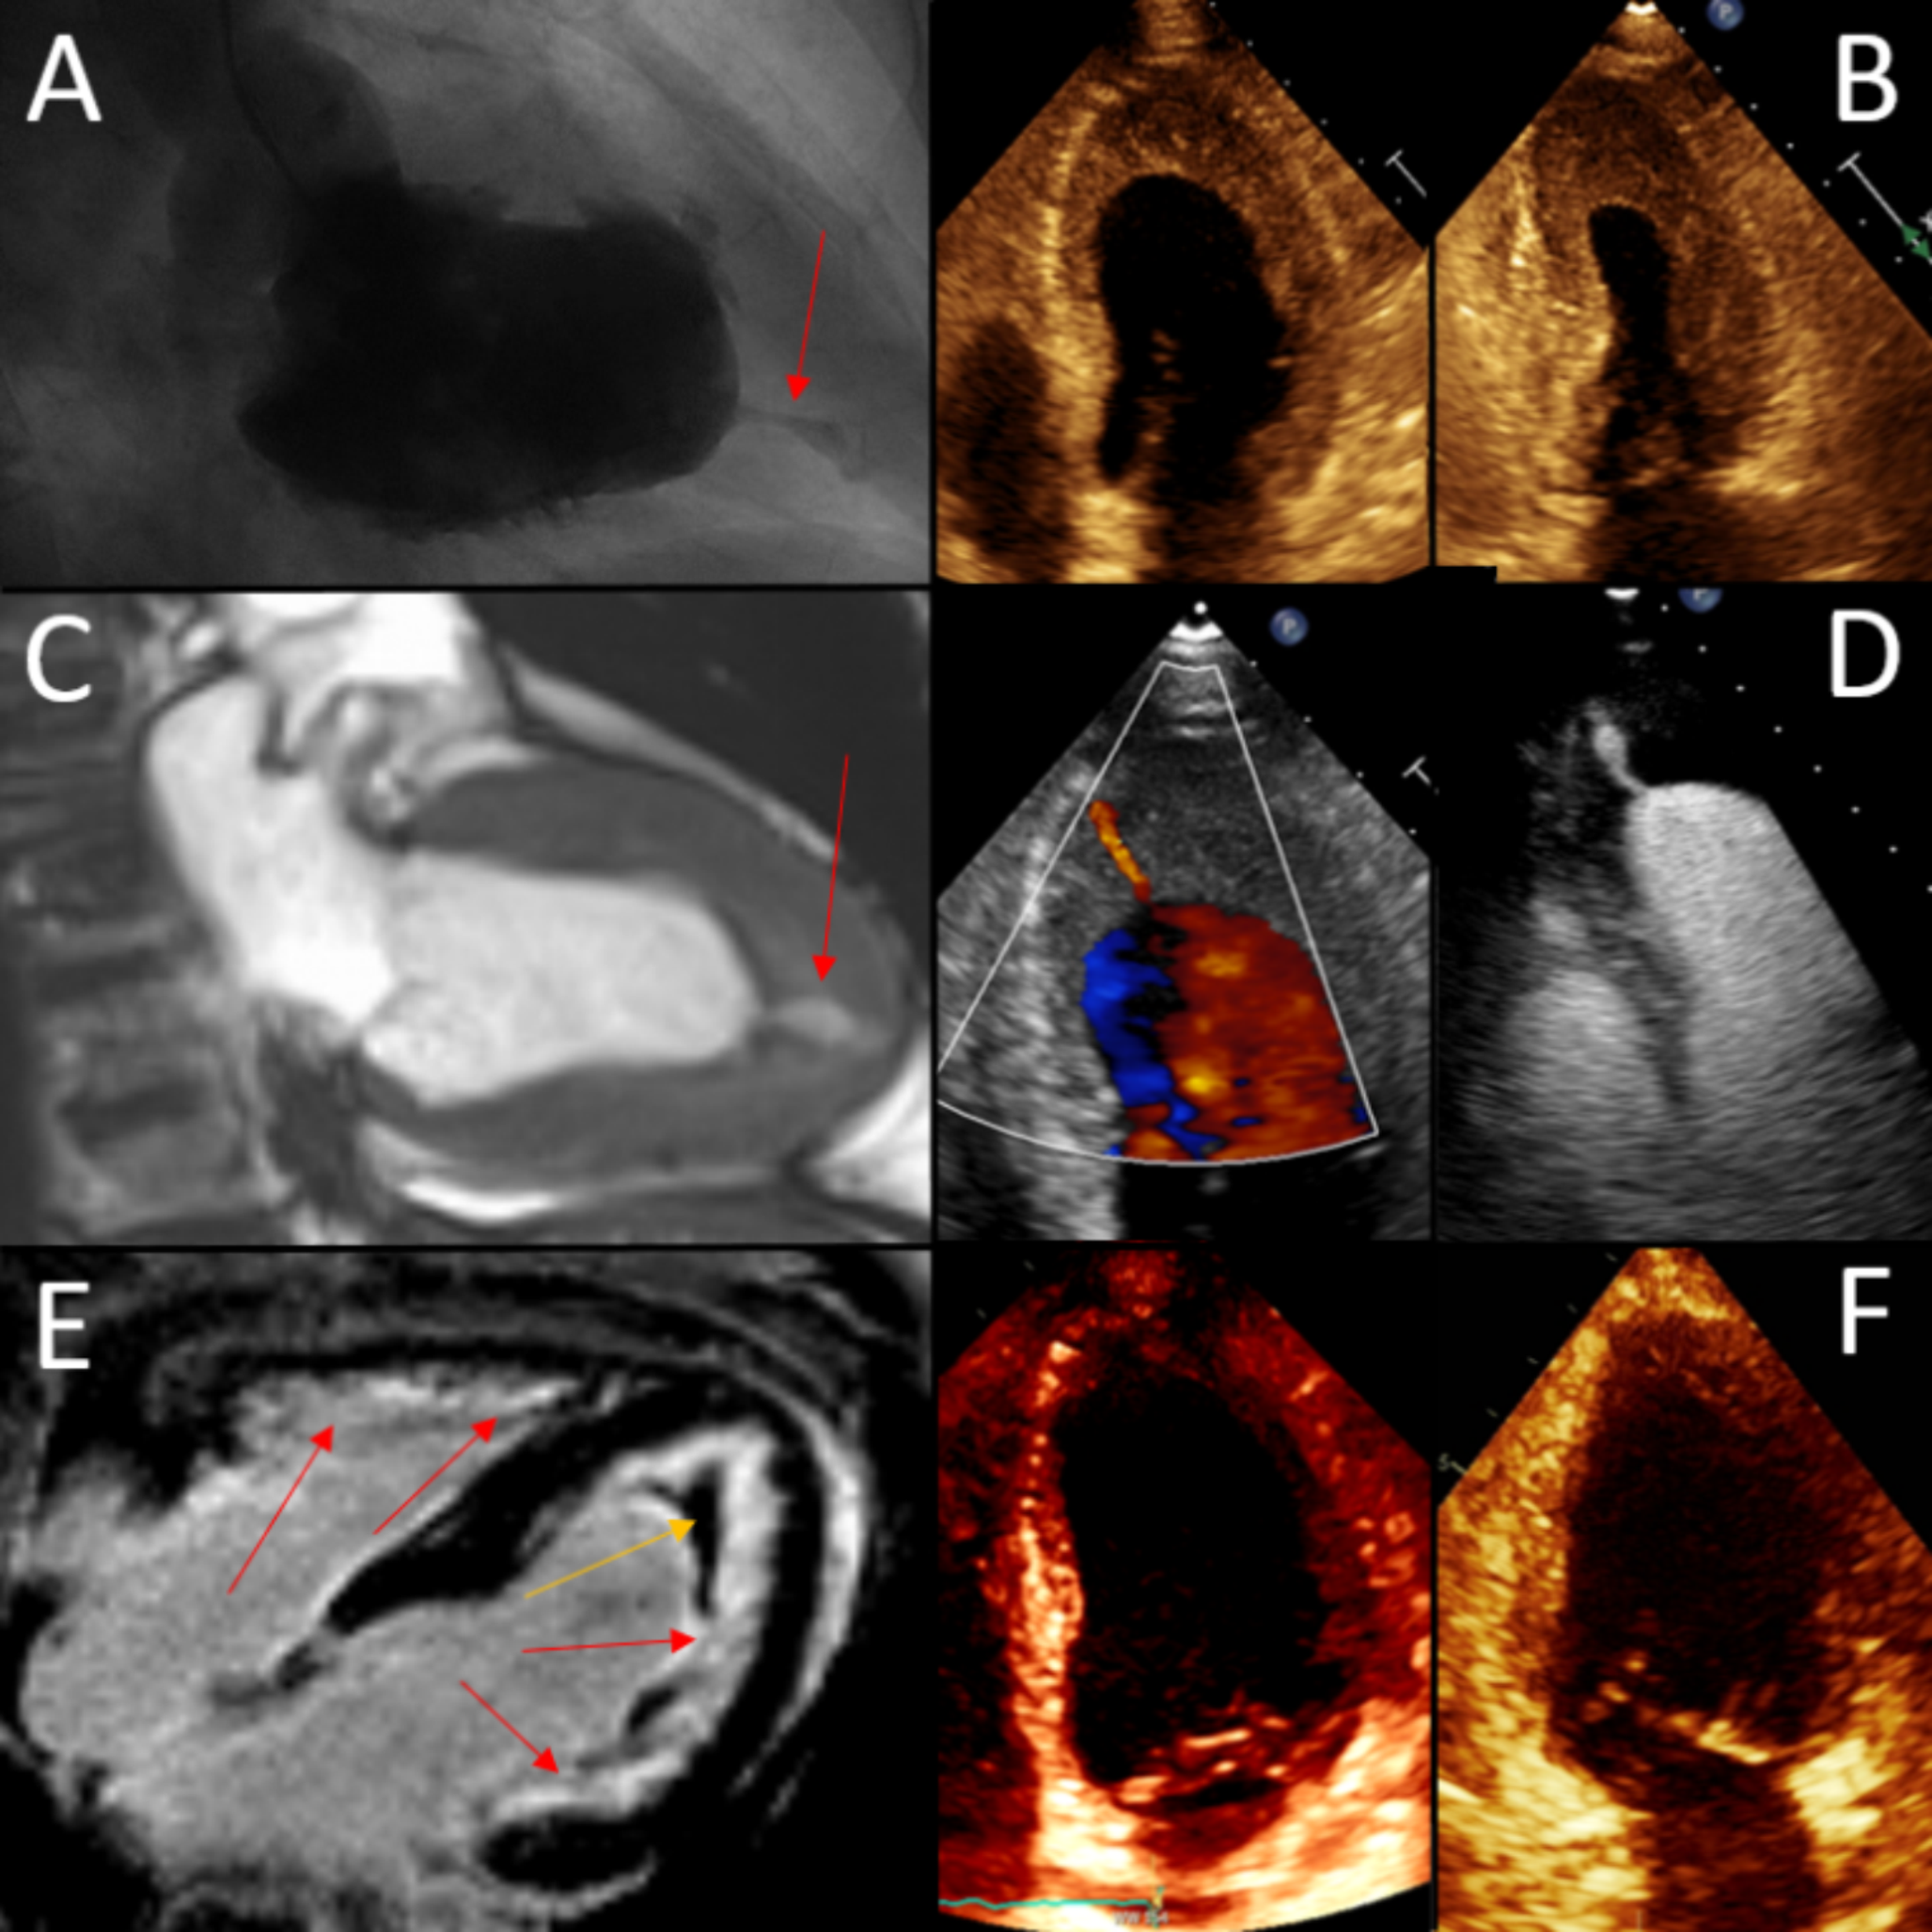 Multimodality imaging of eosinophilic myocarditis (loeffler’s endocarditis) in a patient with idiopathic hypereosinophilic syndrome